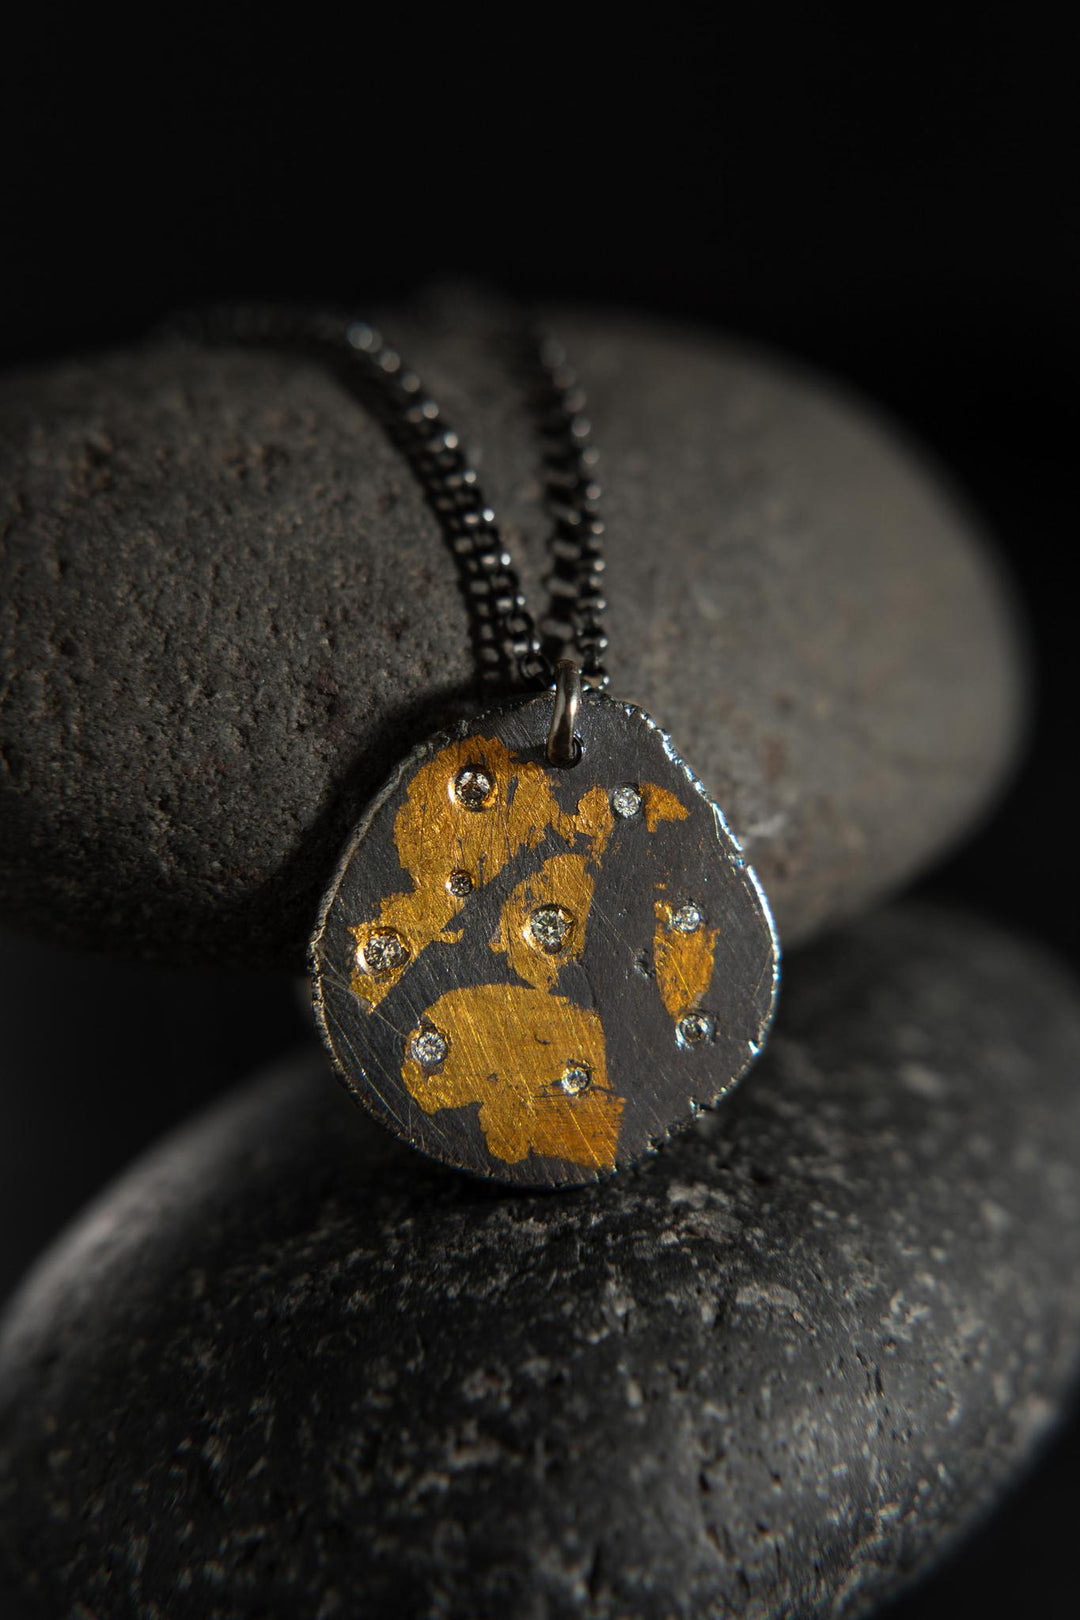 Gilded Relic Starry Night Necklace